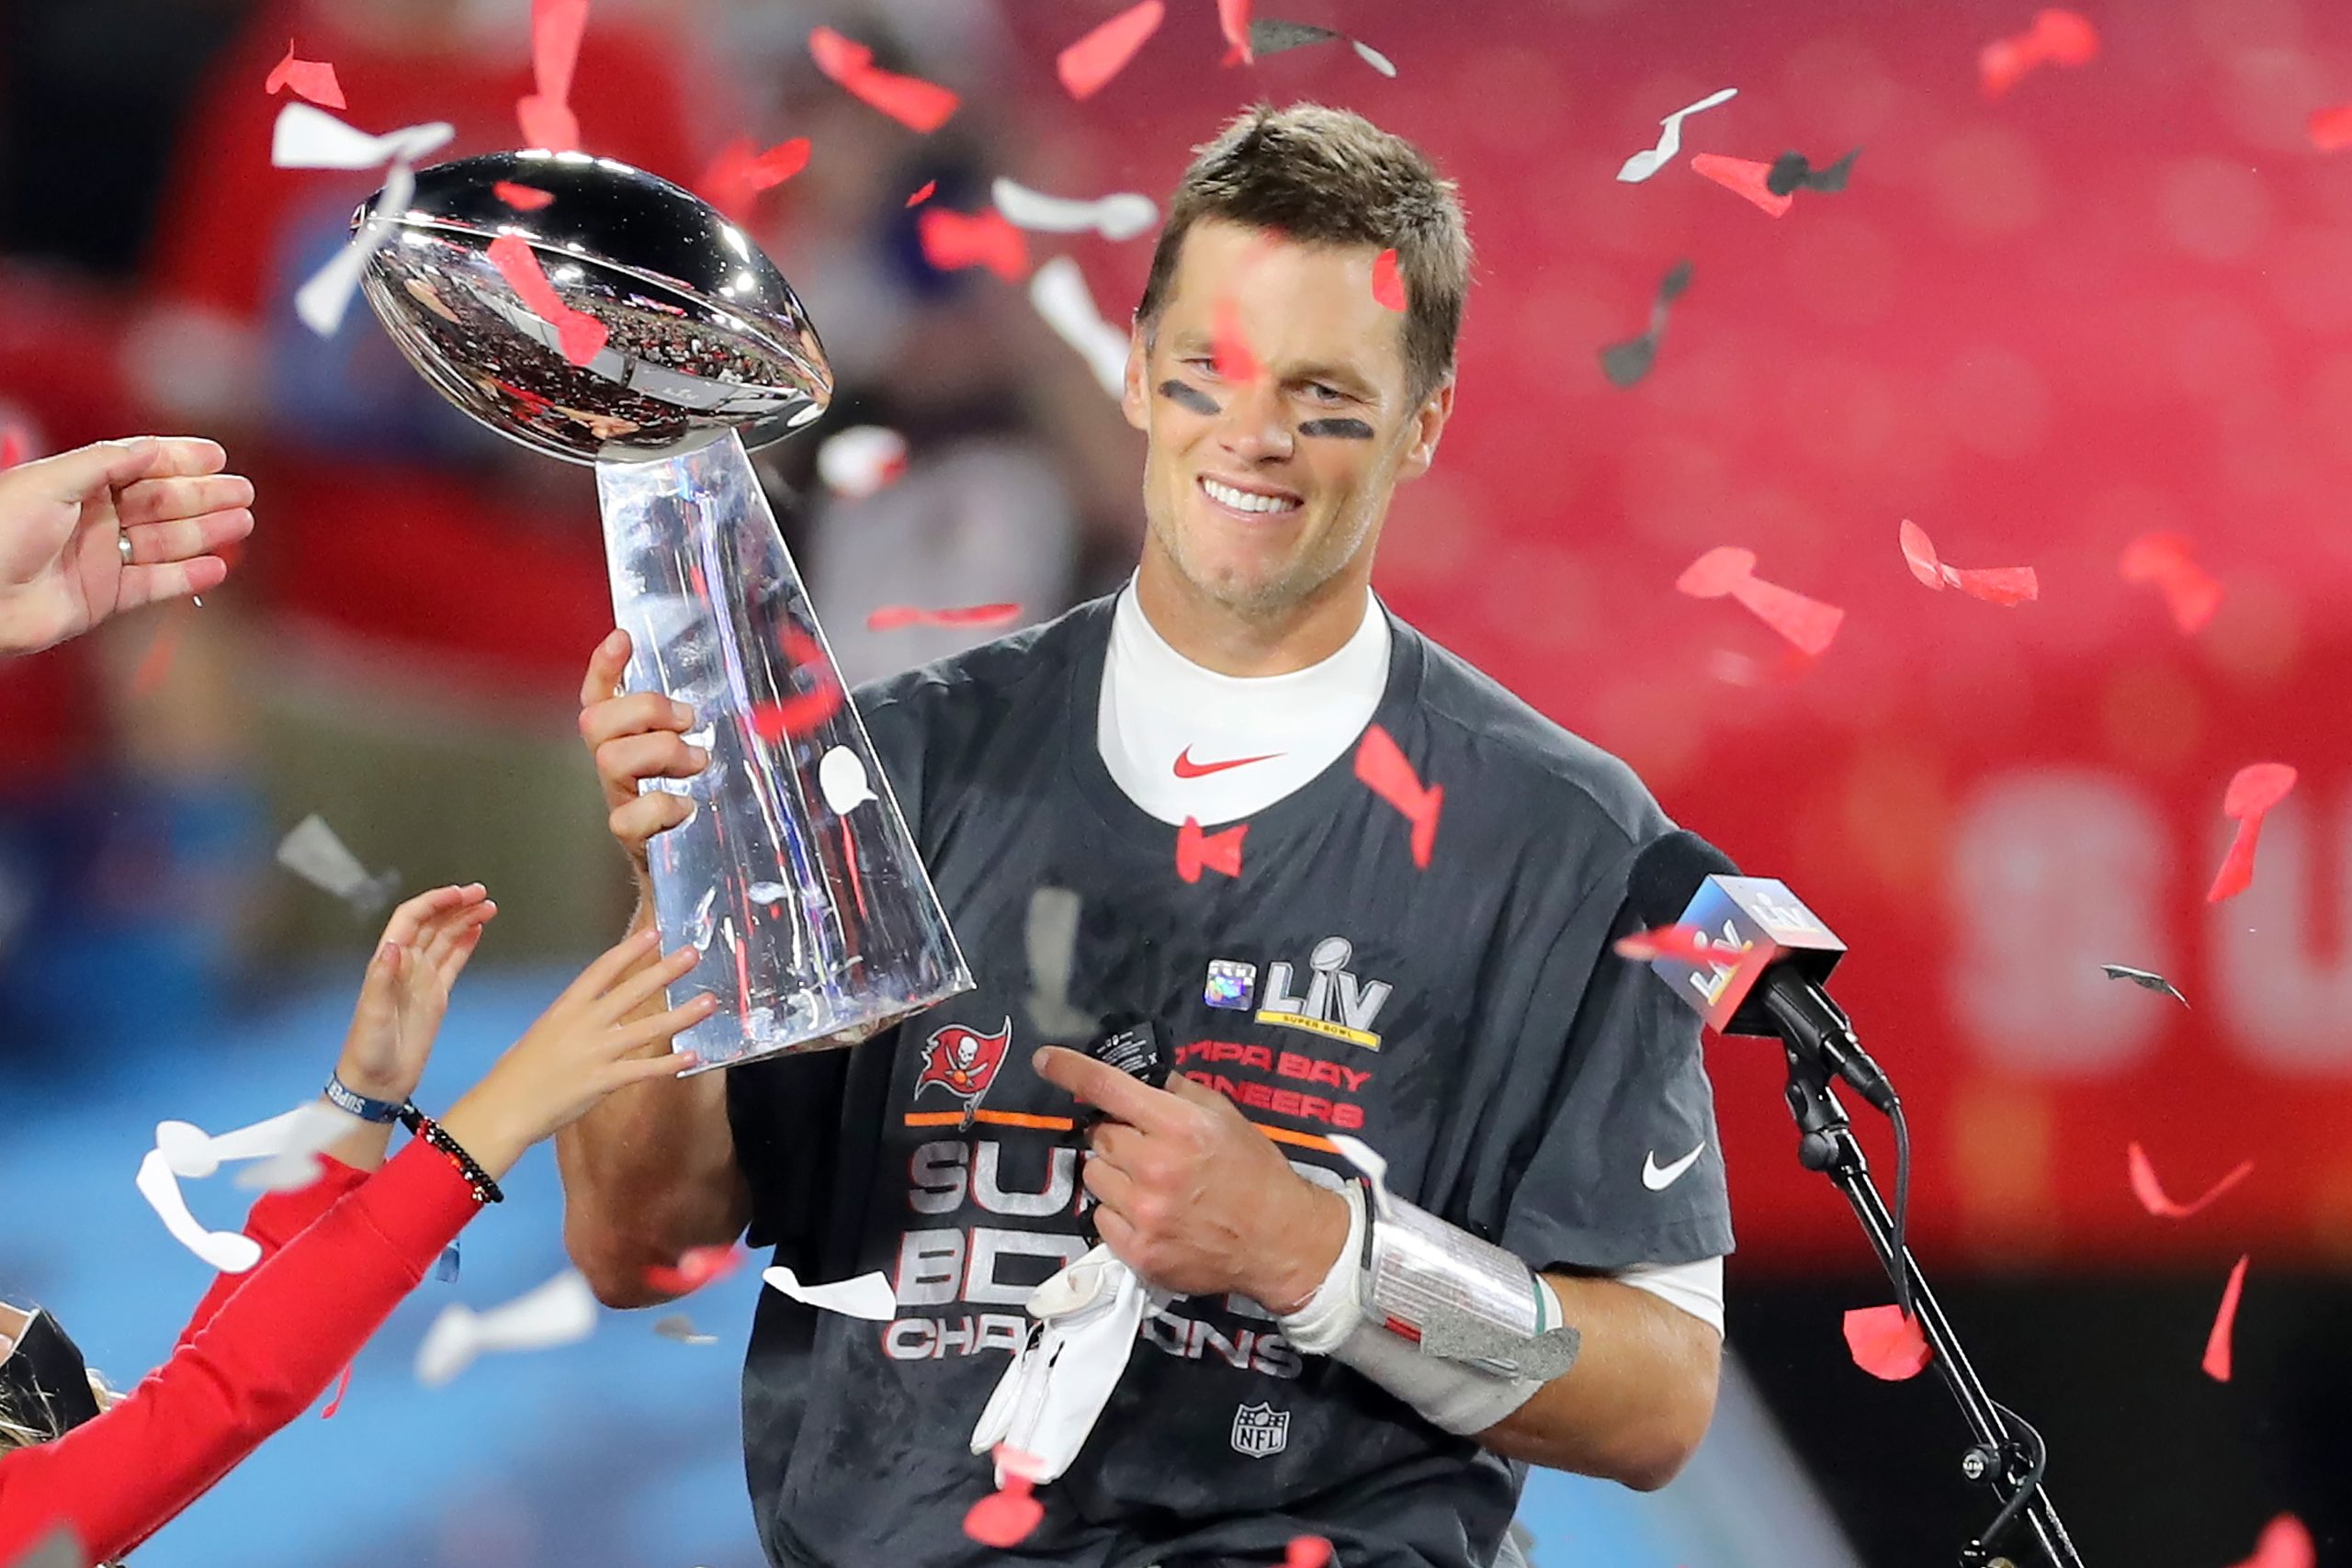 The seven-time Super Bowl champion signed a ten-year deal with the network worth $375 million in May 2022